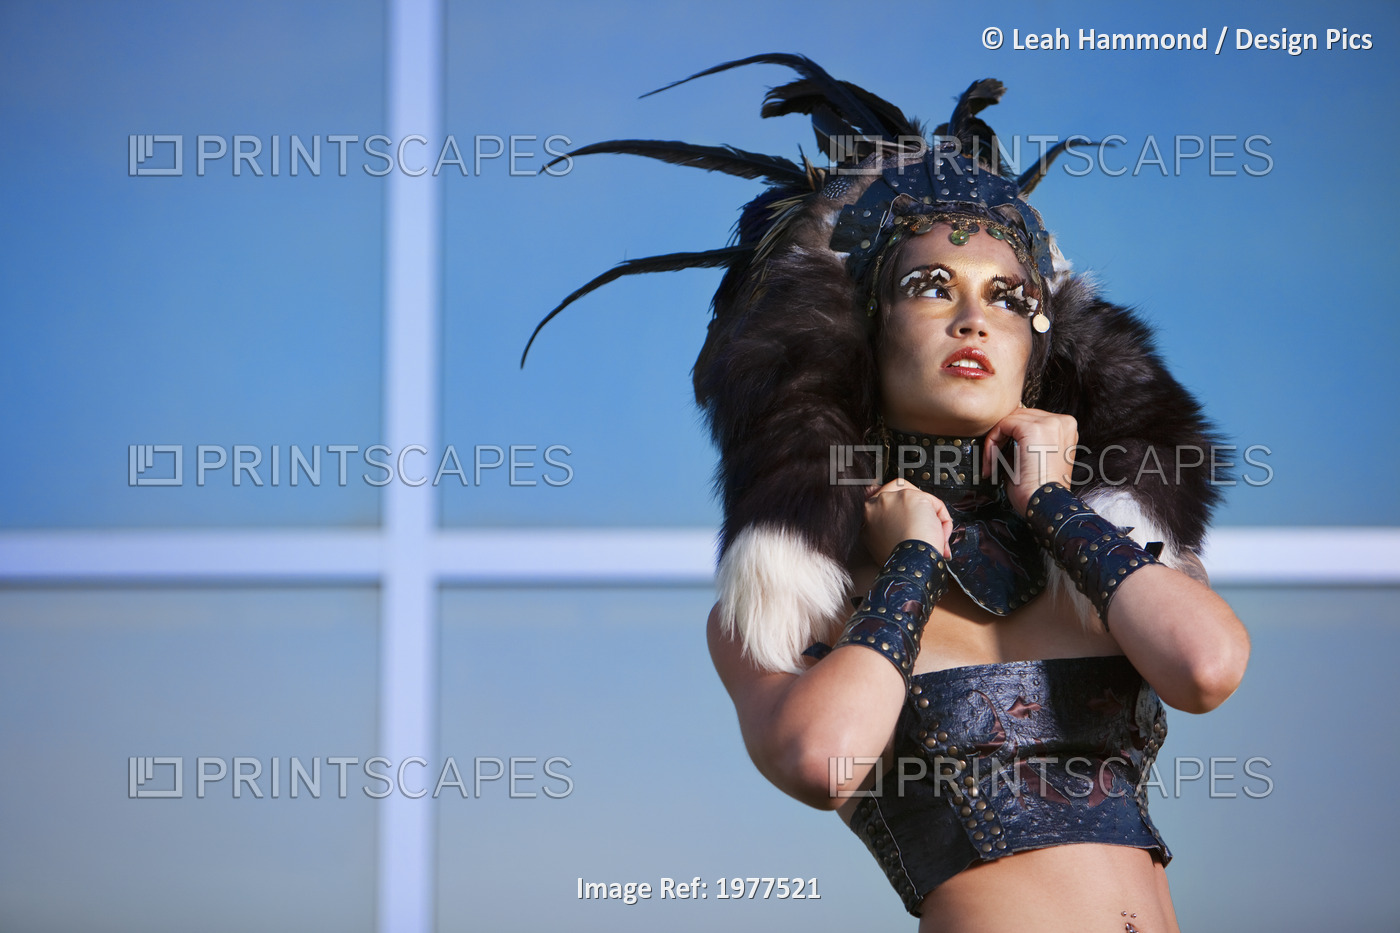 A Glamorous Look With Fur And Feather Accessories; Edmonton Alberta Canada